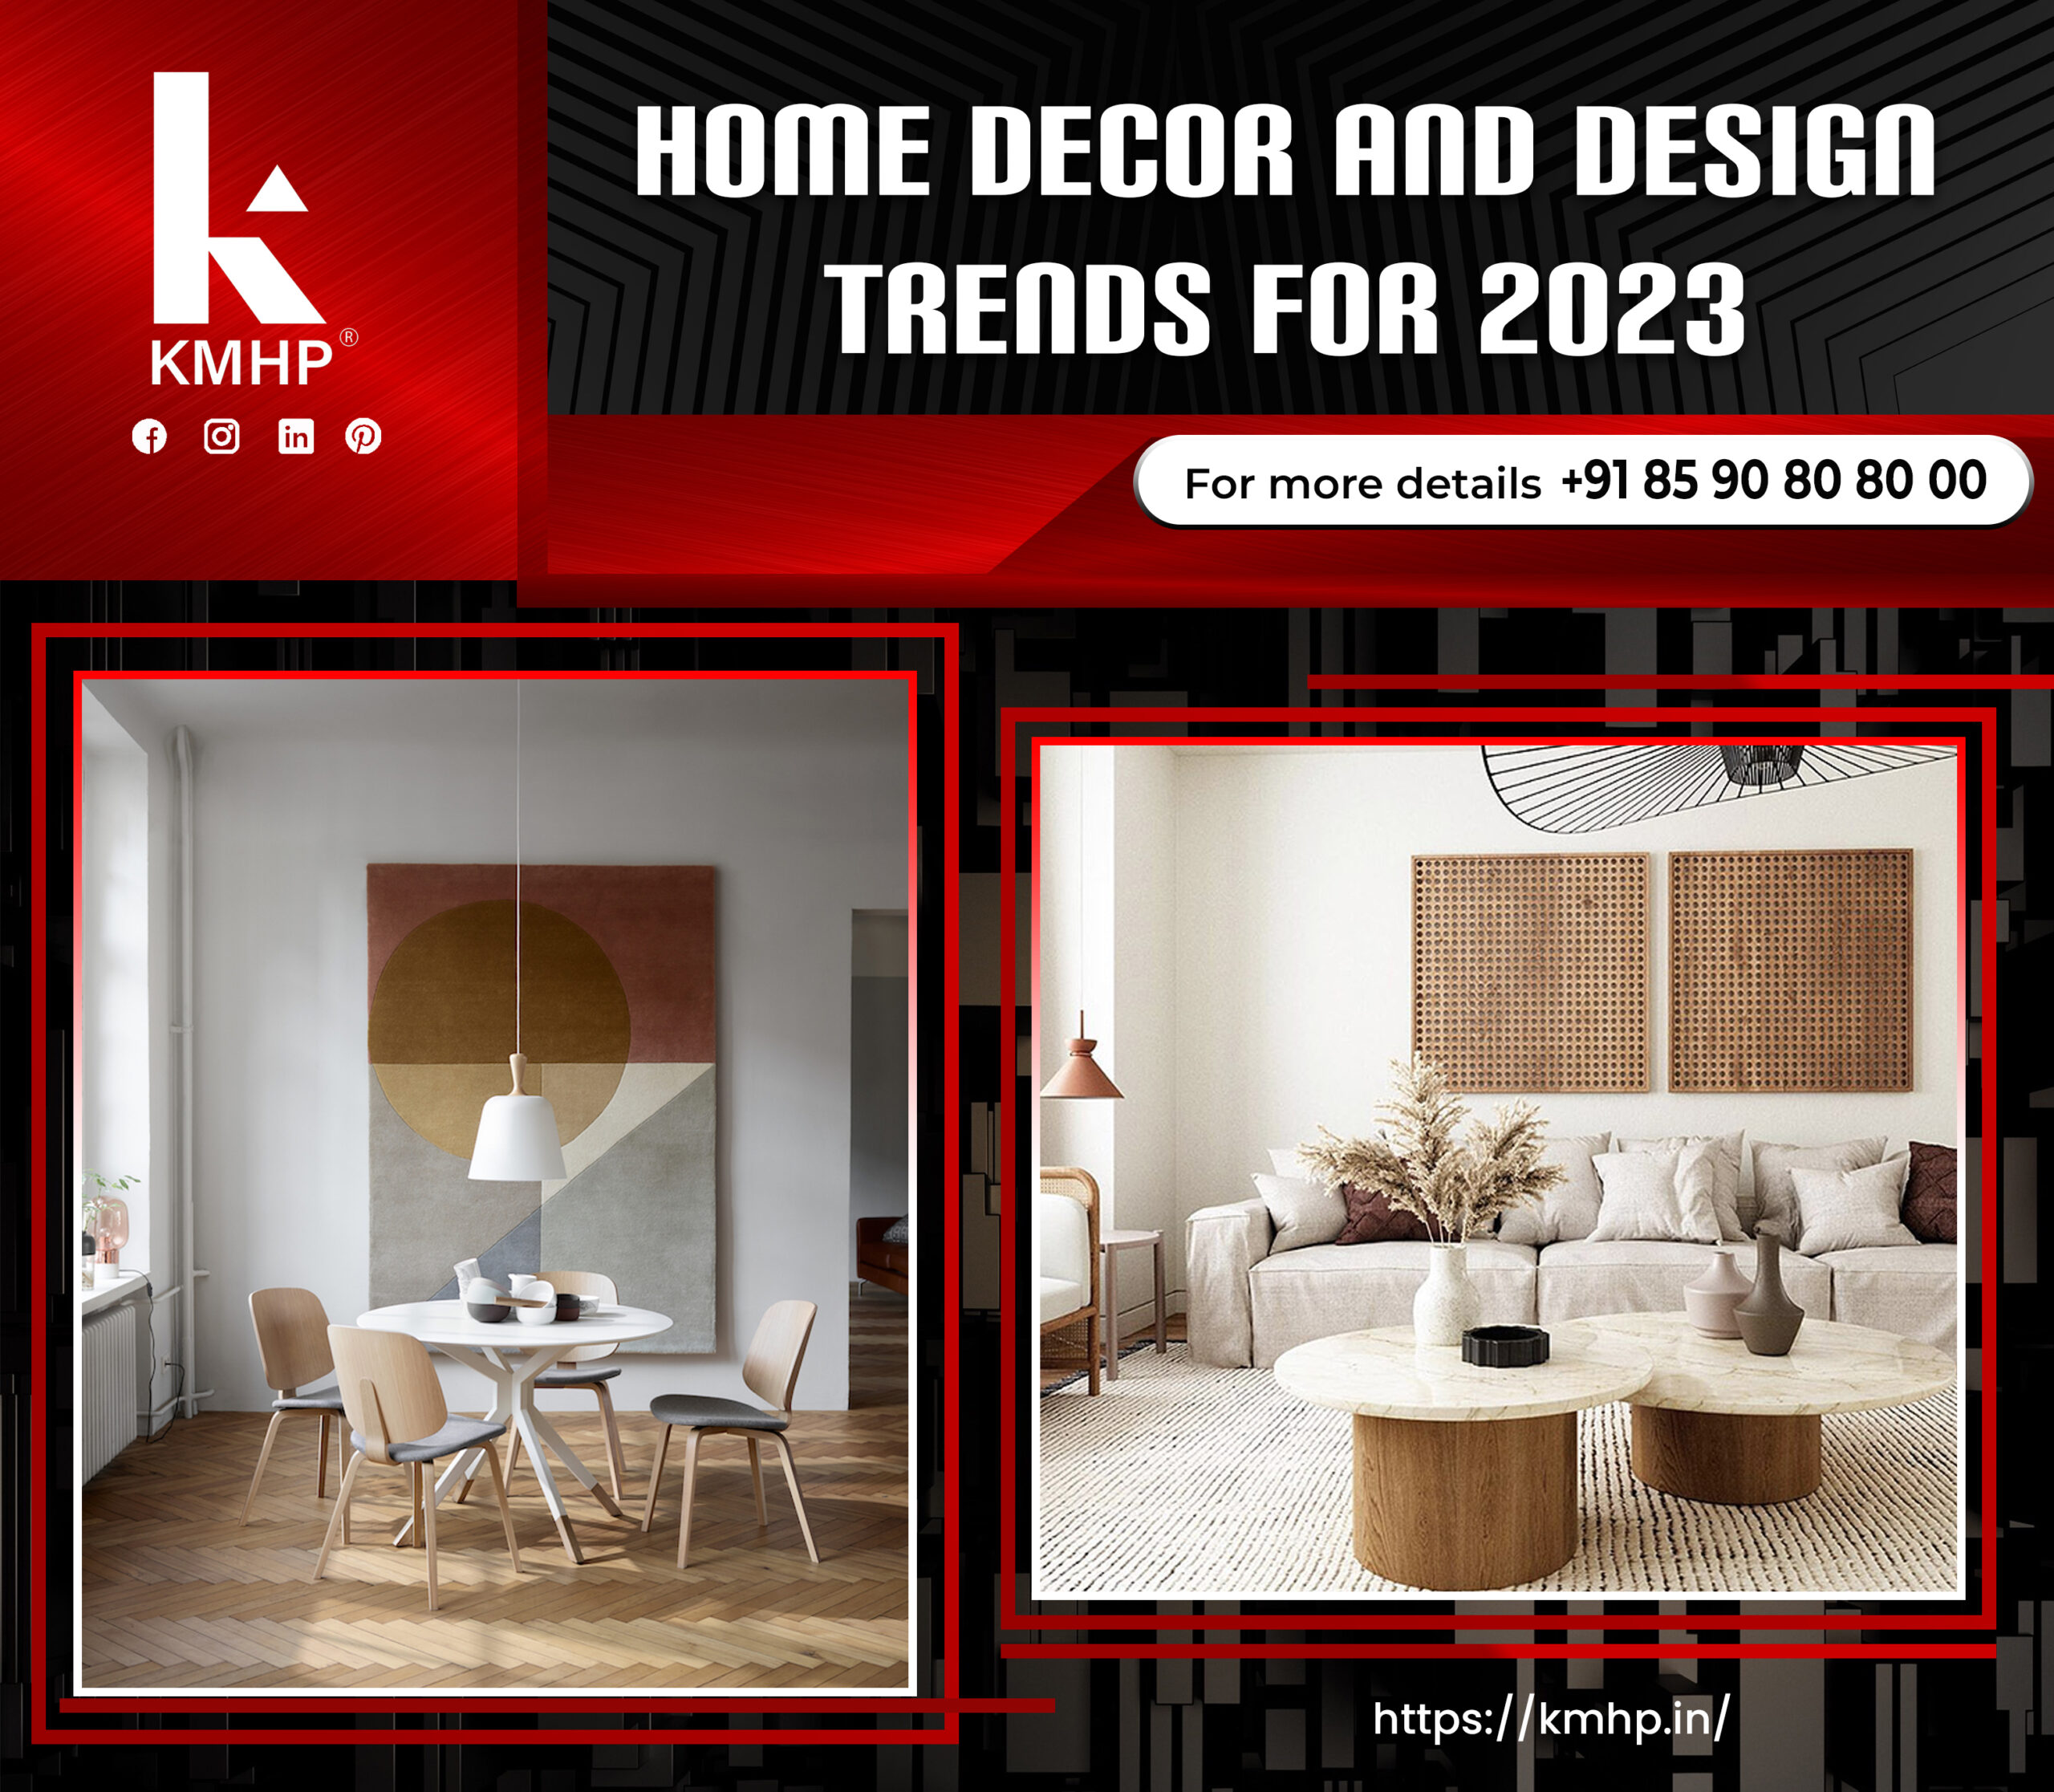 Home decor and design trends for 2023